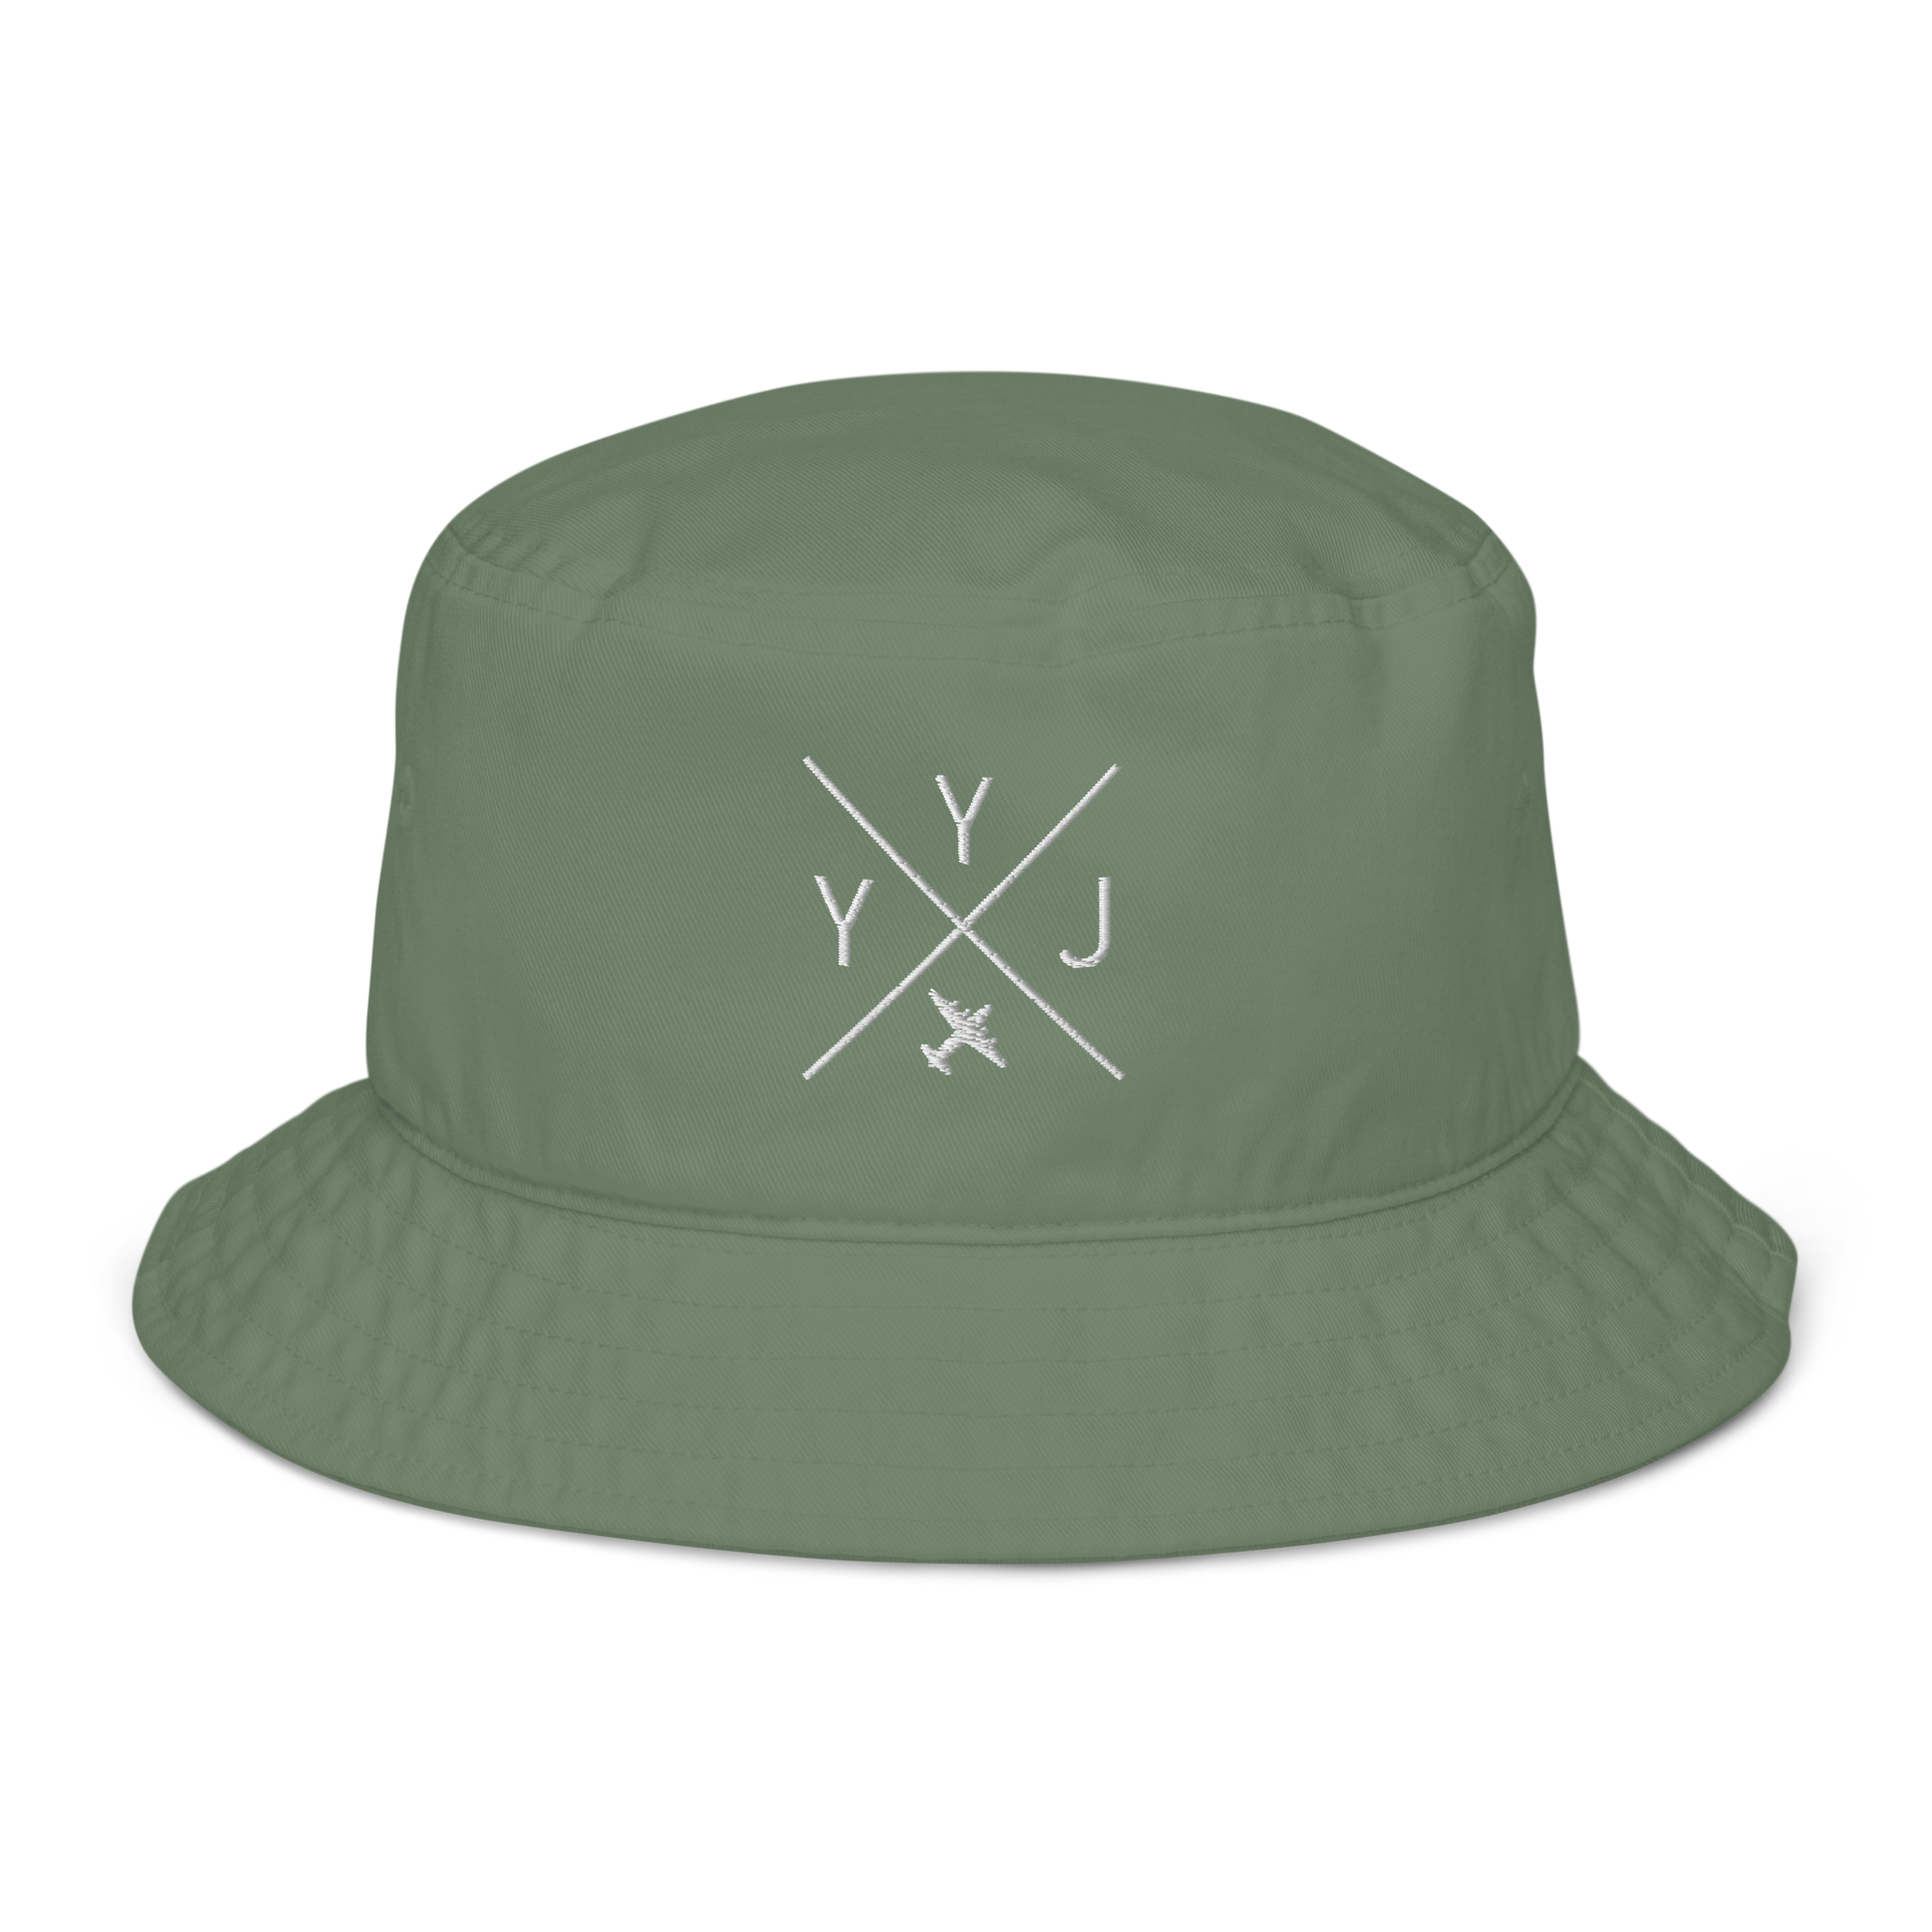 YHM Designs - YYJ Victoria Organic Cotton Bucket Hat - Crossed-X Design with Airport Code and Vintage Propliner - White Embroidery - Image 06